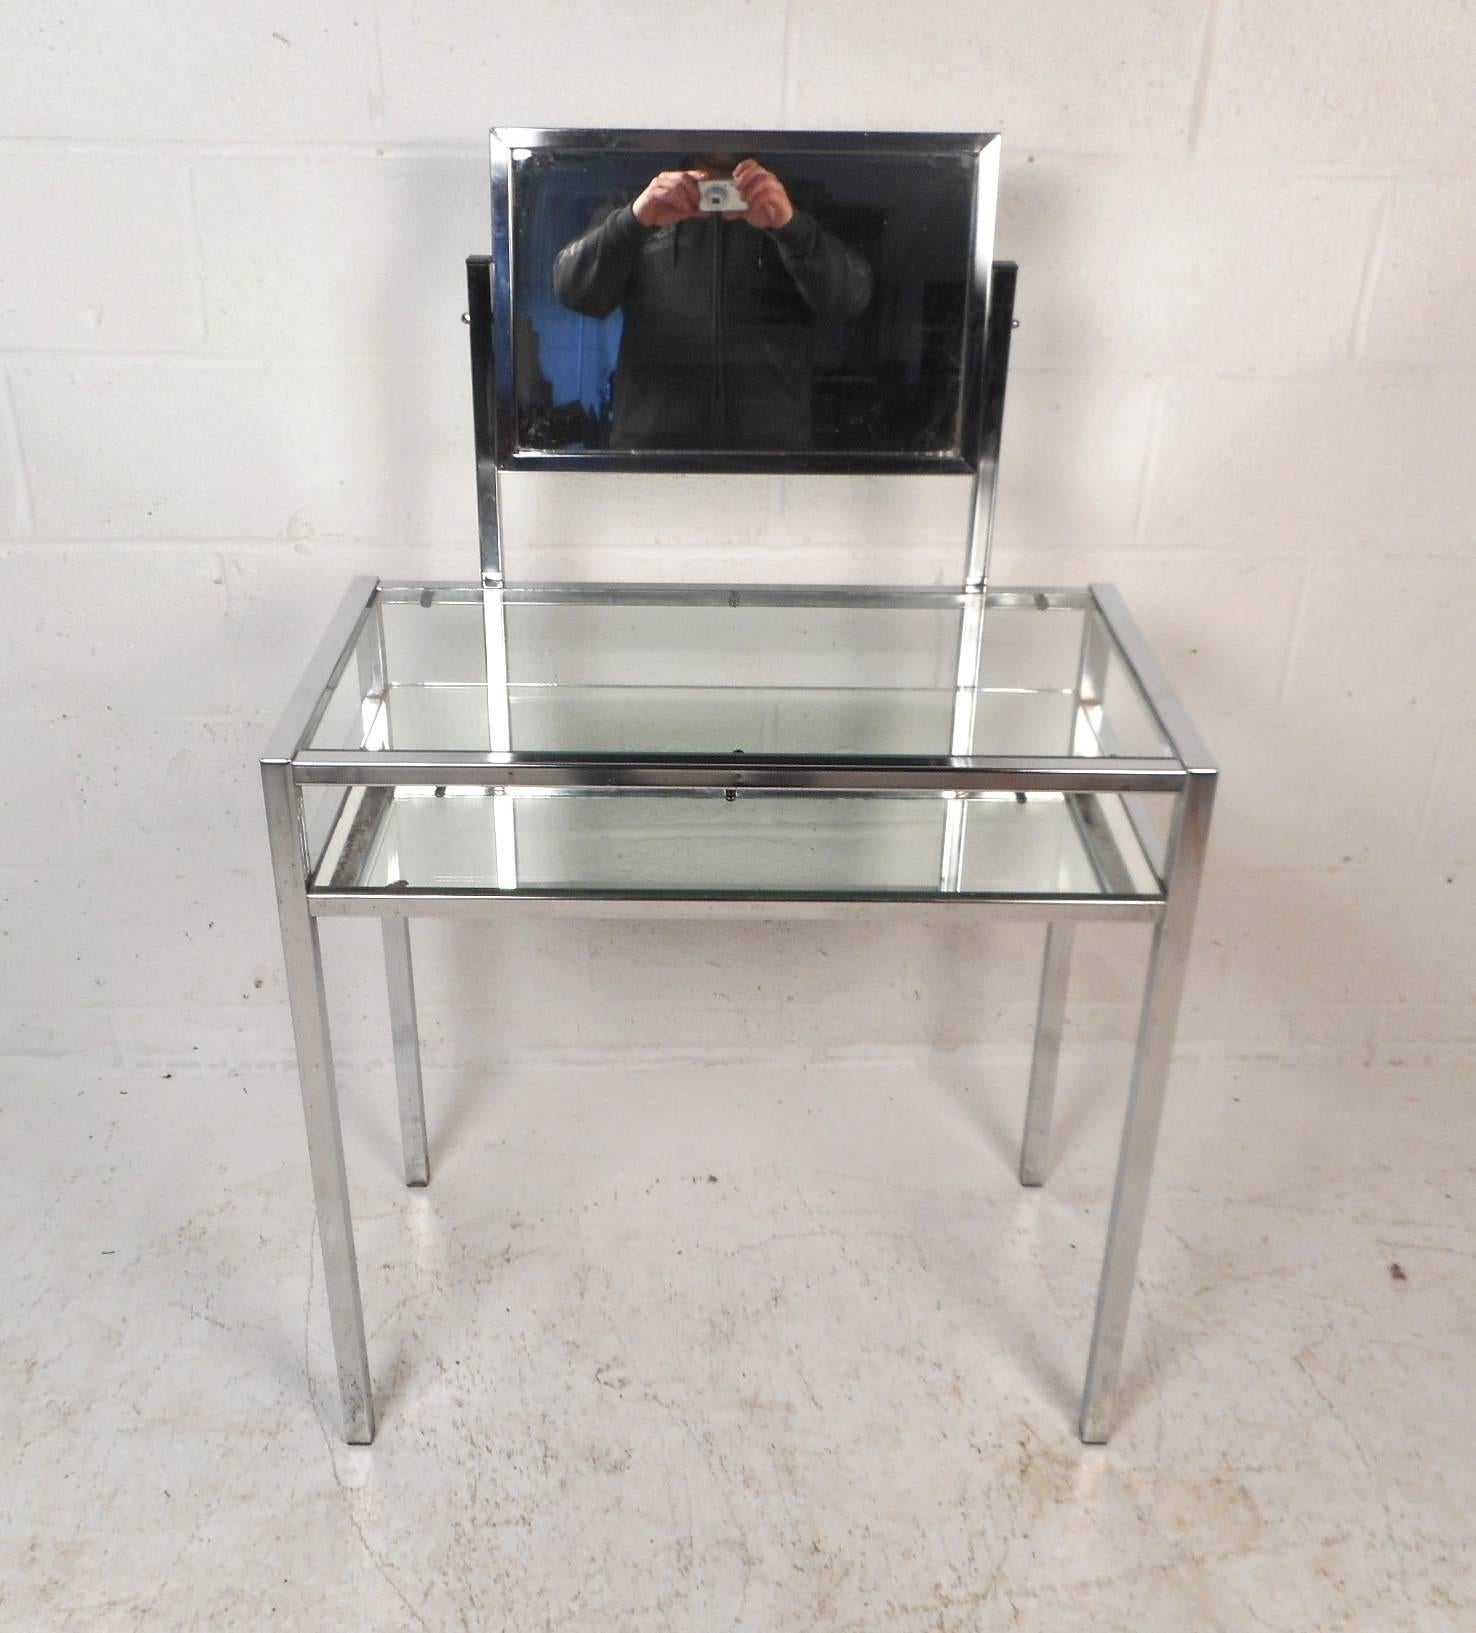 This beautiful vintage modern vanity features a heavy chrome frame with two tiers and a mirror. The unique design has a lower tier with a mirror top and a clear glass tabletop to set items on. Stylish console table with a mirror that swivels